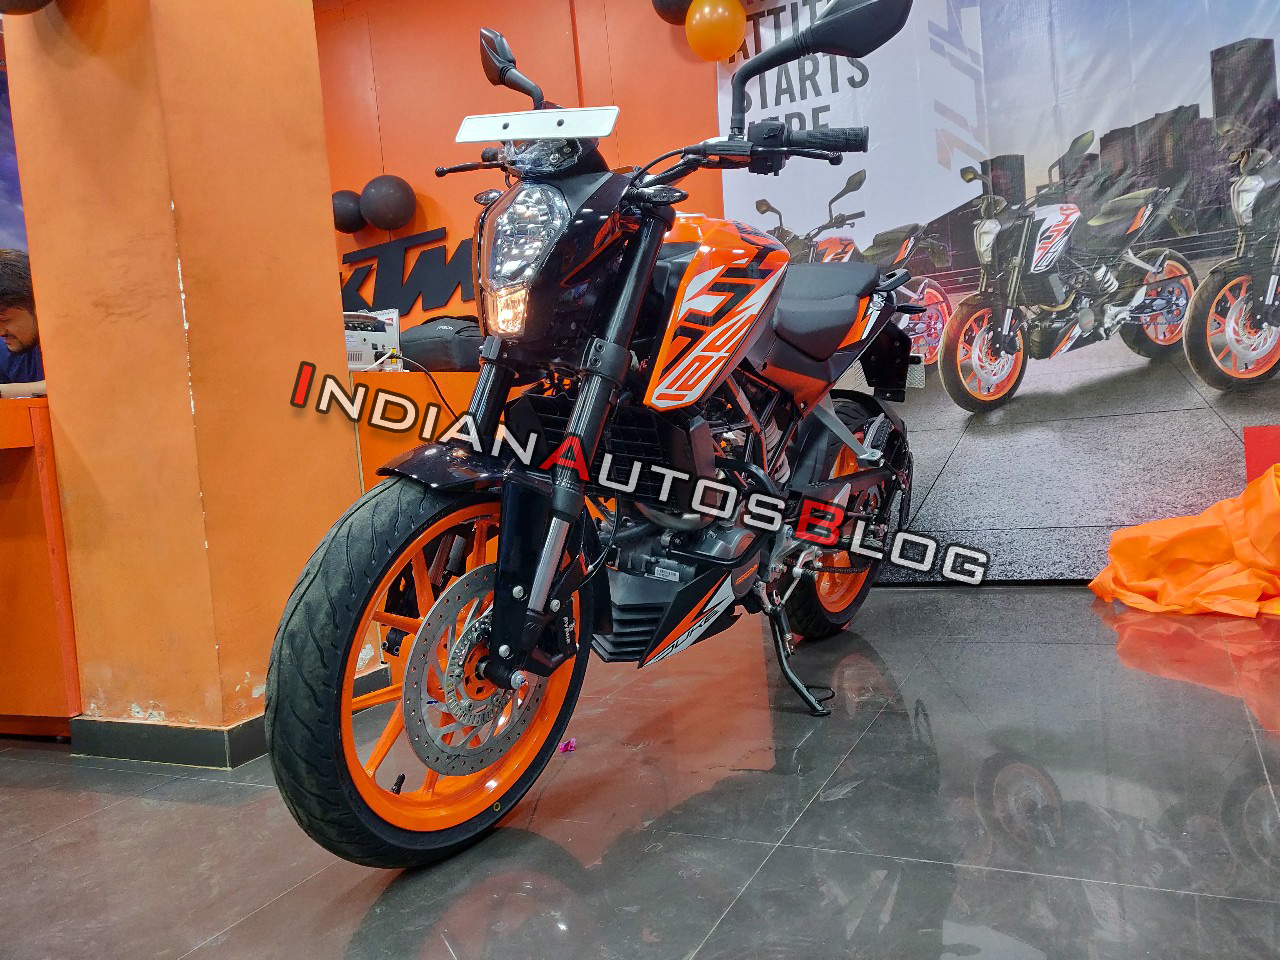 KTM DUKE 125  Motorcycle Giant  West London Motorcycle  Scooter Sales   Service Centre